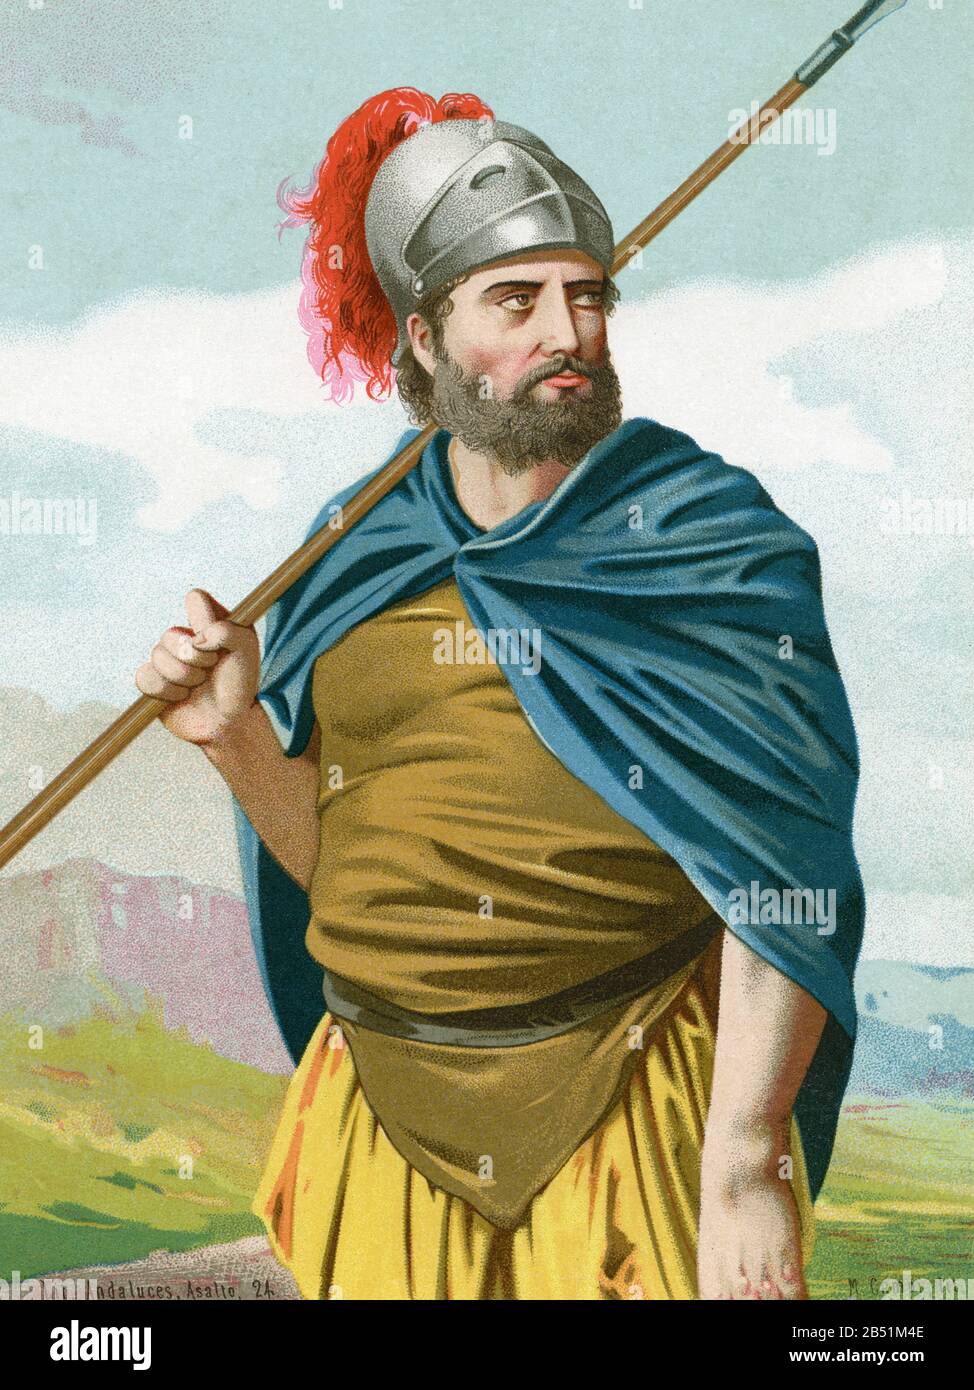 Old color lithography portrait. Hannibal (247-183 BC.). Carthaginian general and statesman considered one of the greatest military strategists in hist Stock Photo